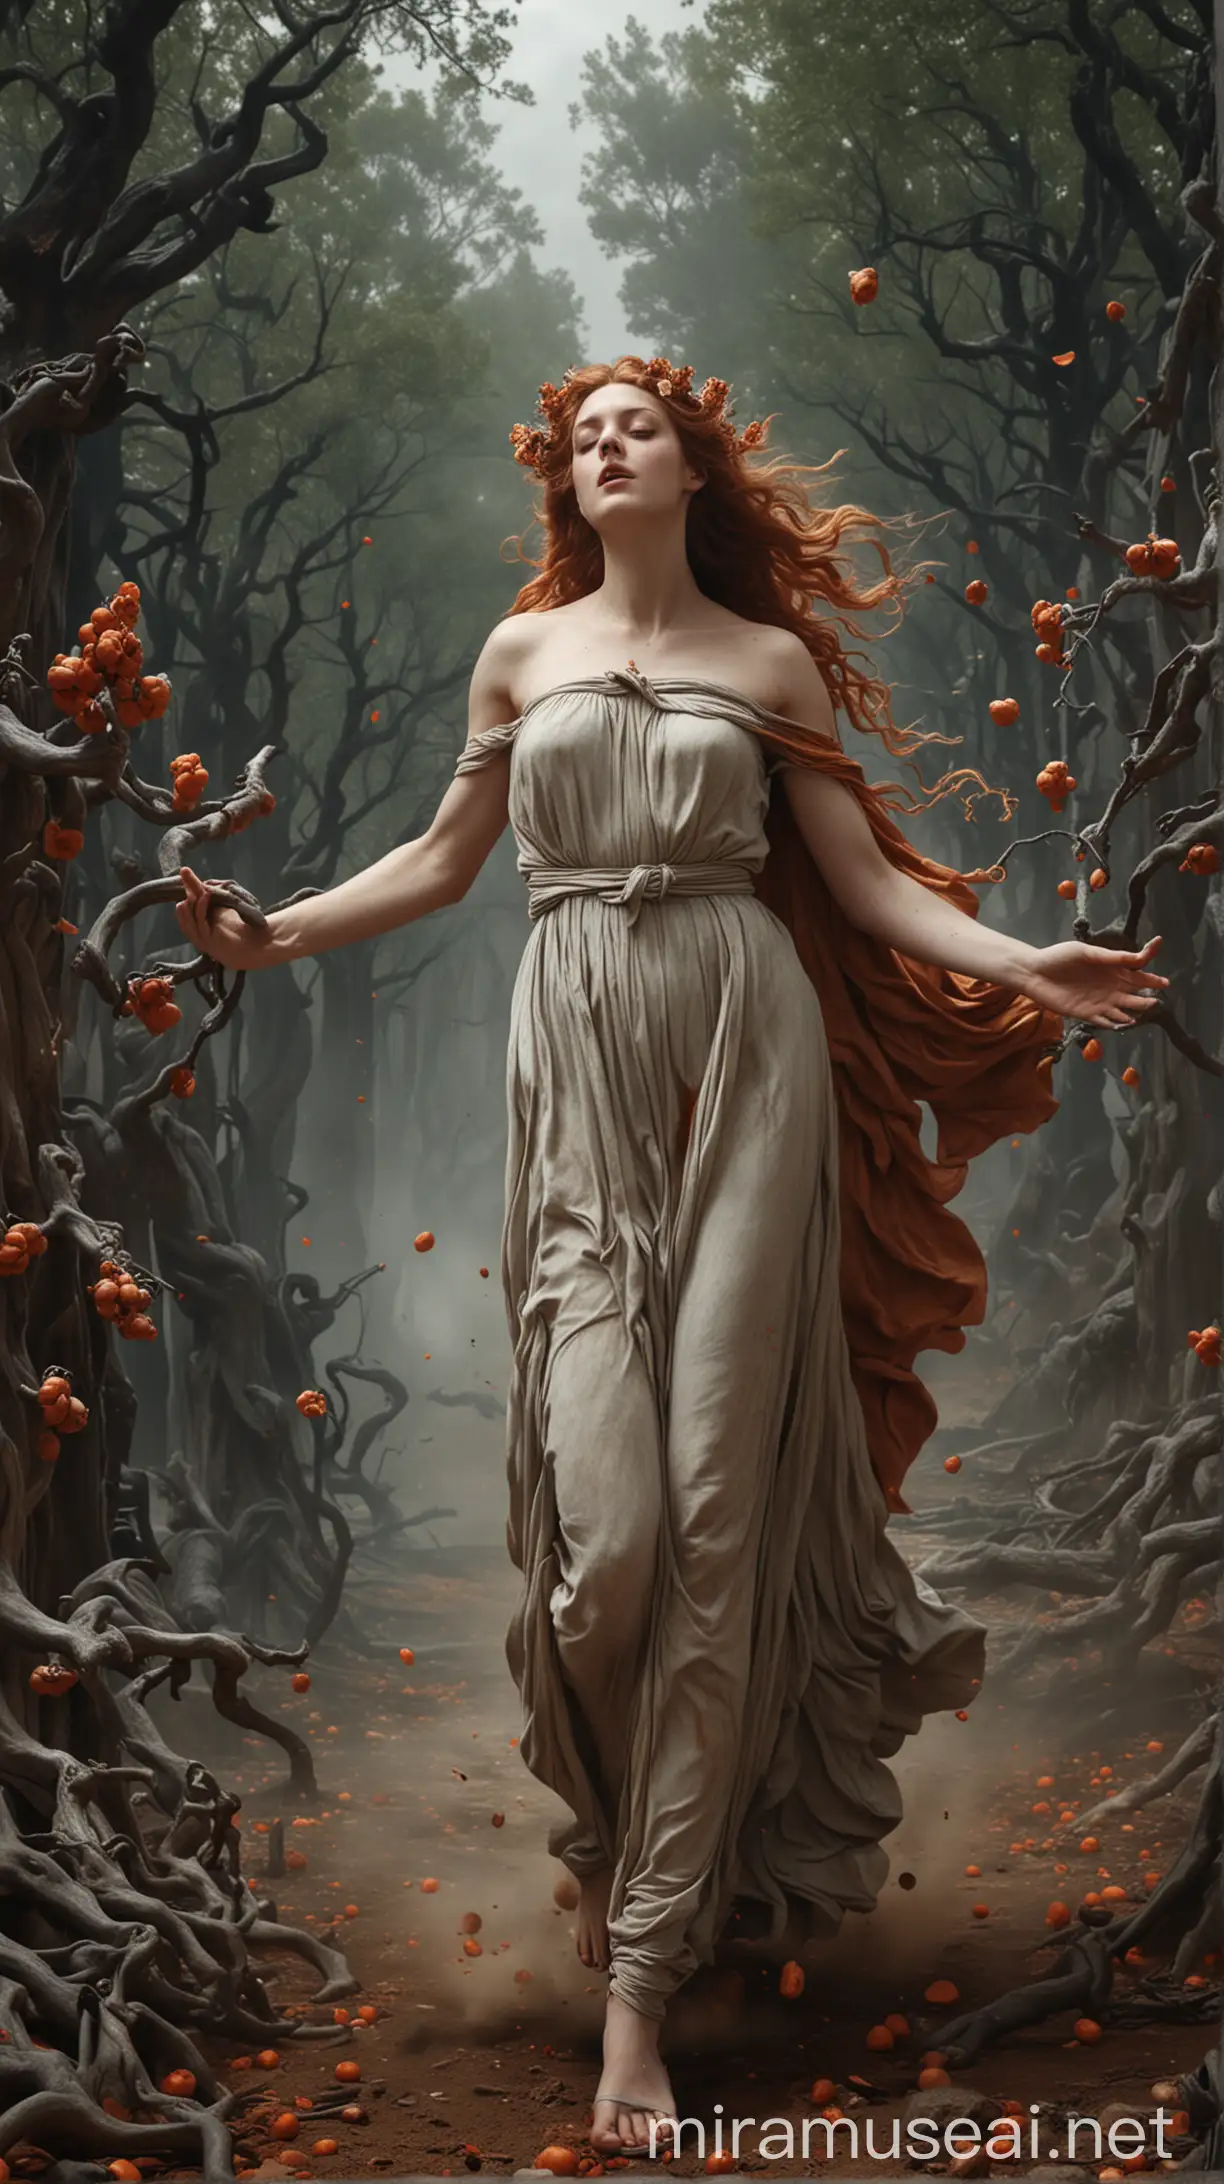 Persephone Abduction Hades and Sorrowful Demeter in Hyper Realistic Depiction